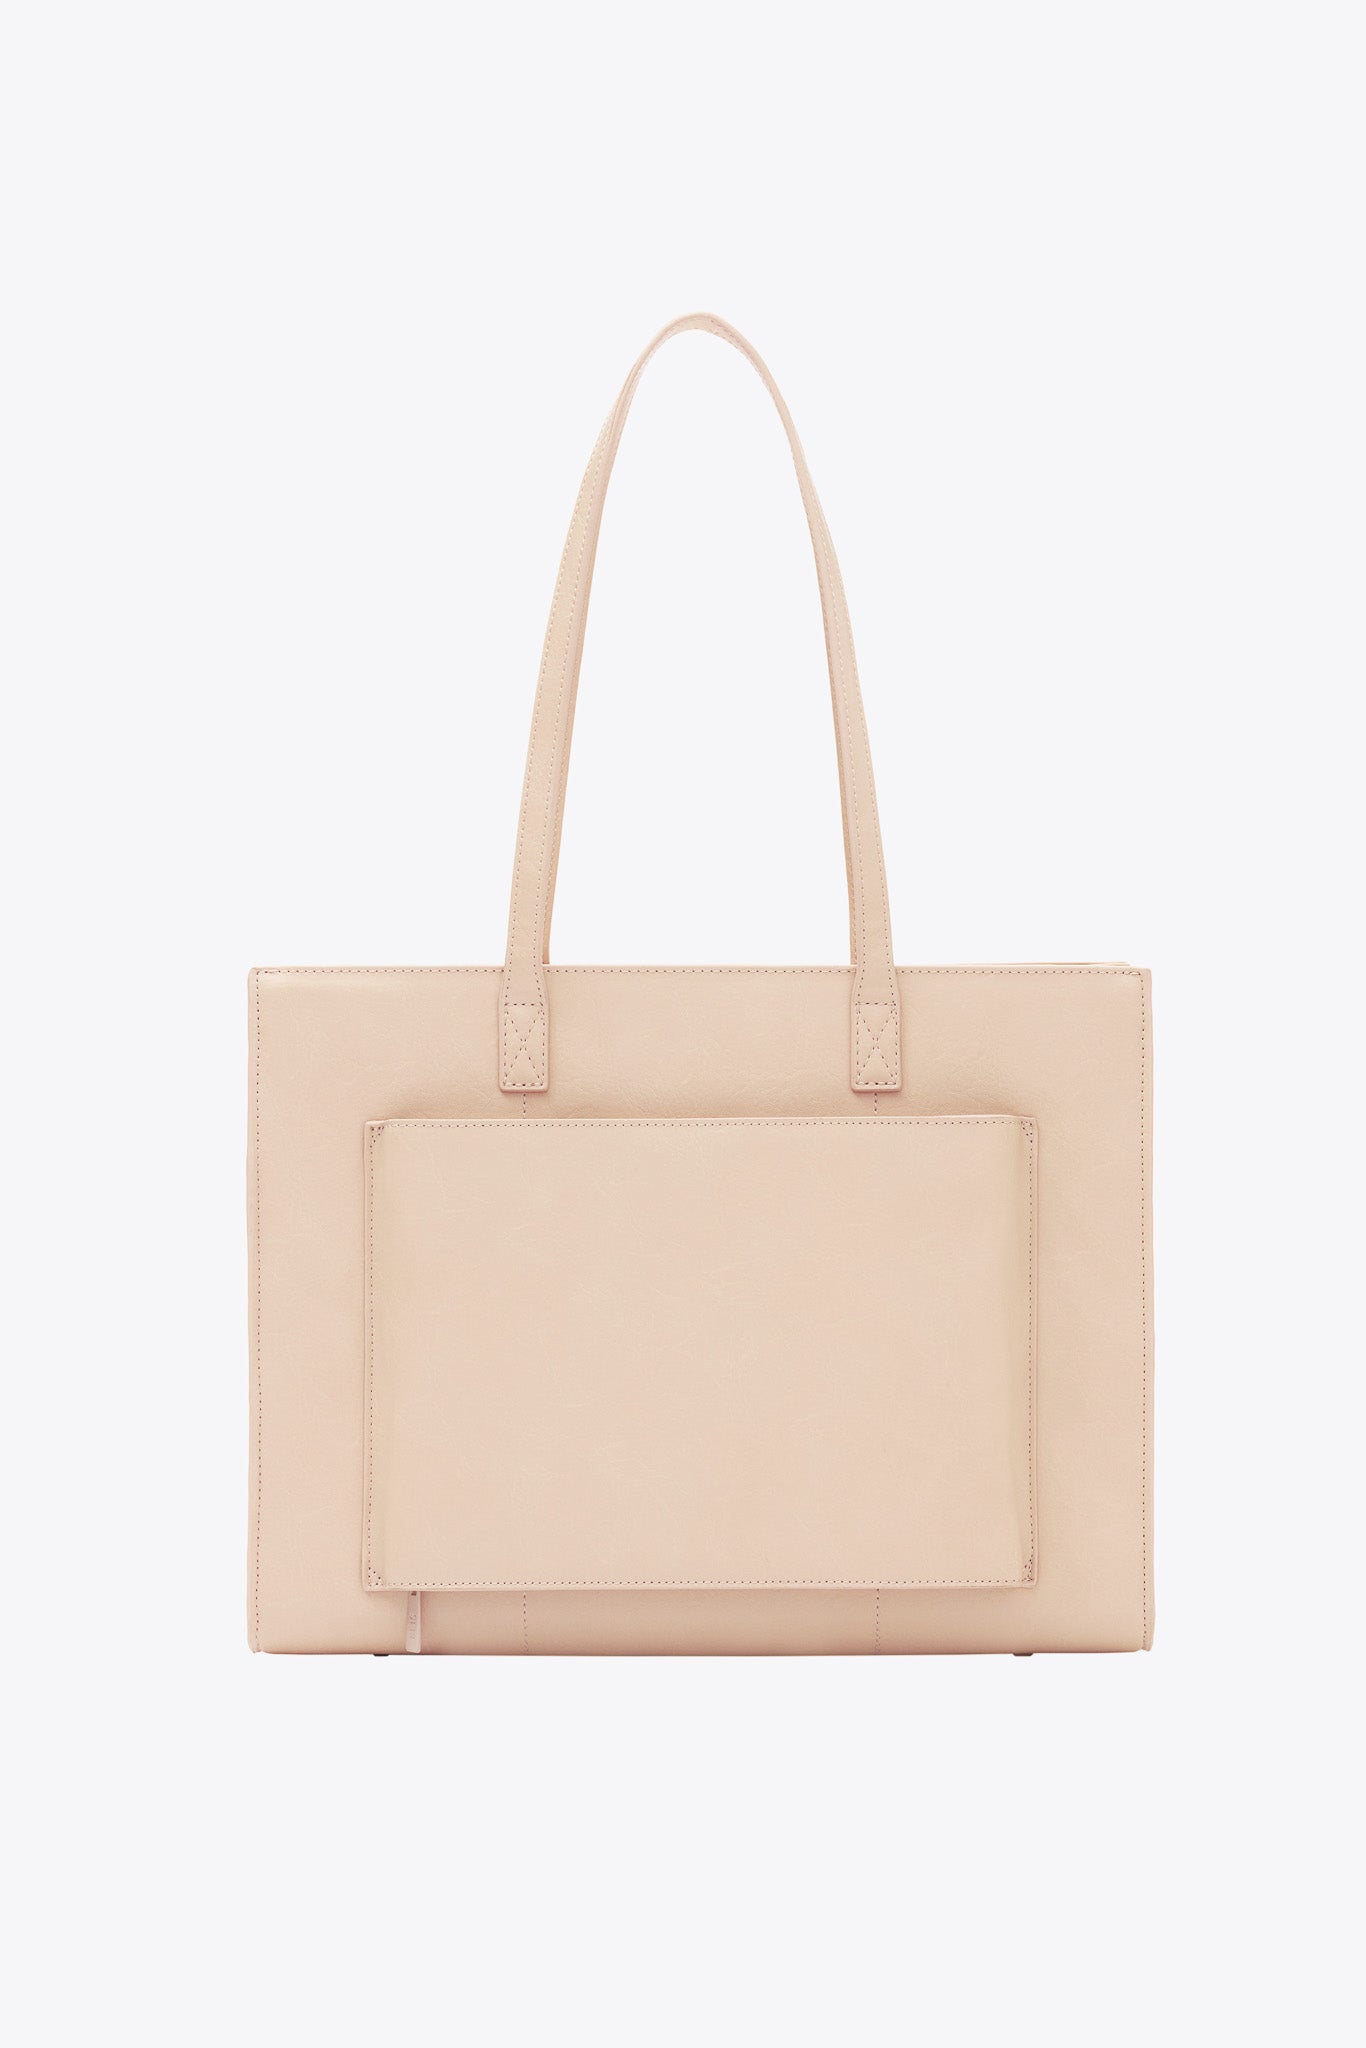 The Work Tote in Beige